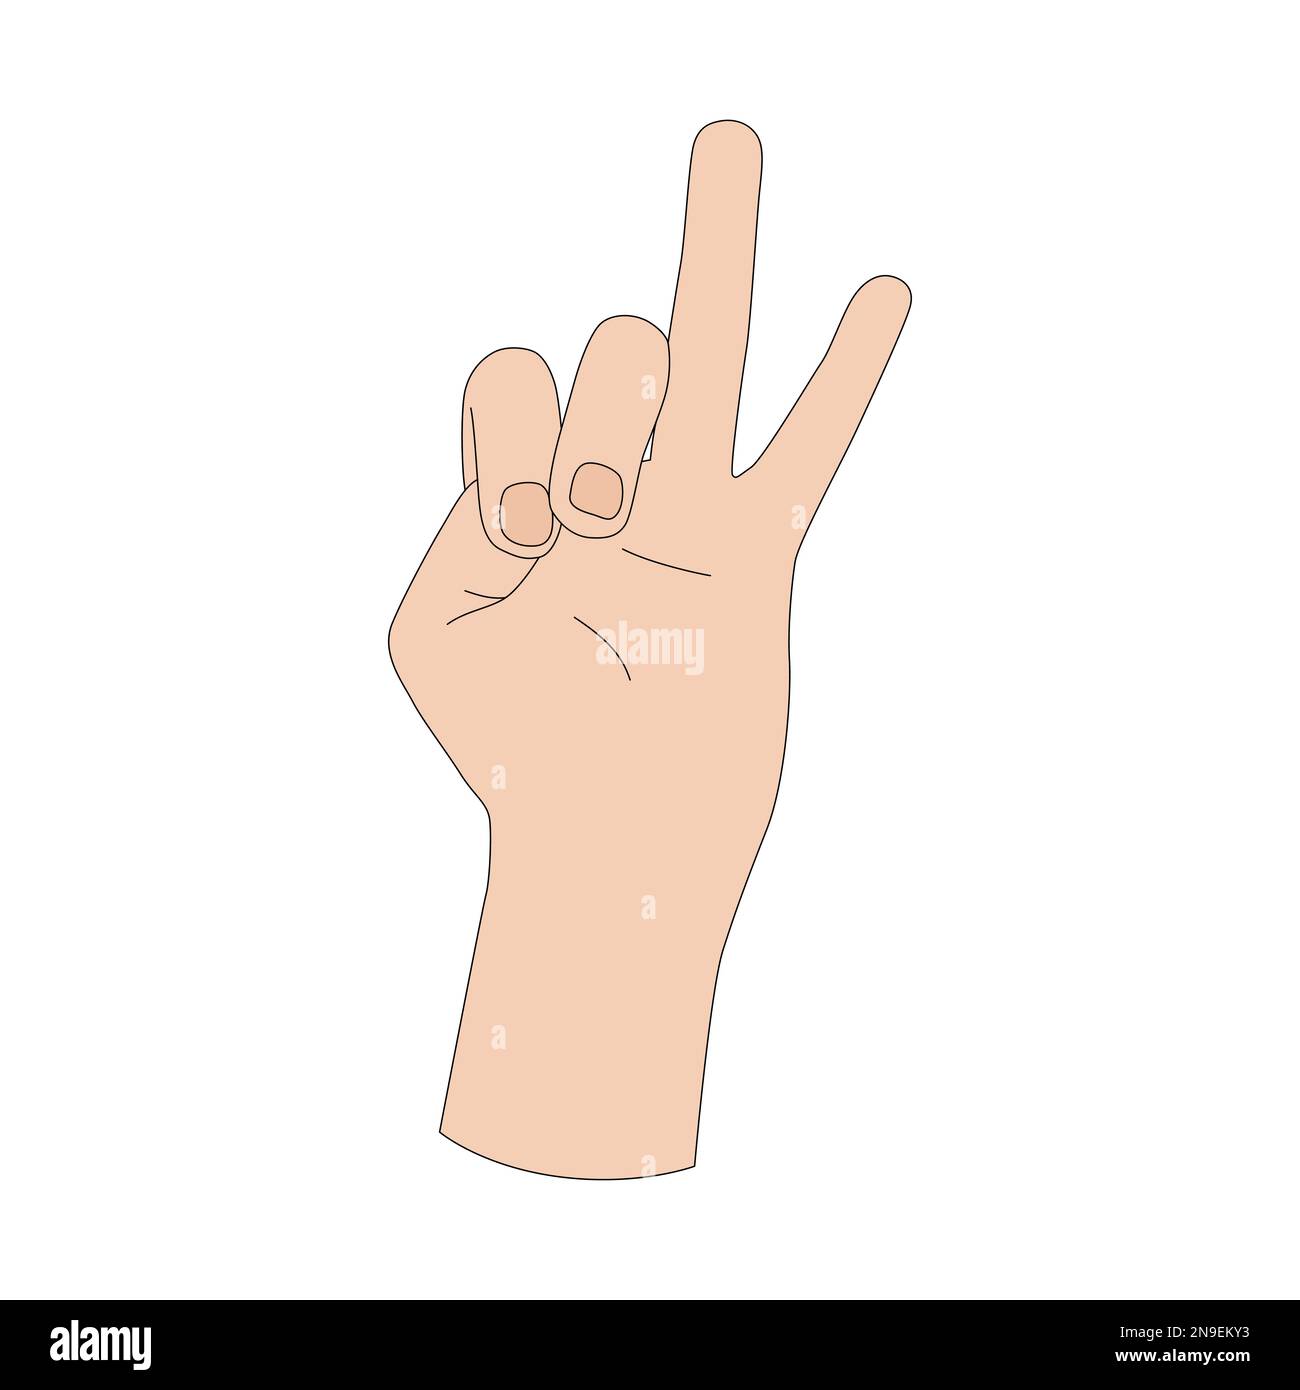 A hand gesture. The number one. Sign language. Vector illustration isolated on white background Stock Vector